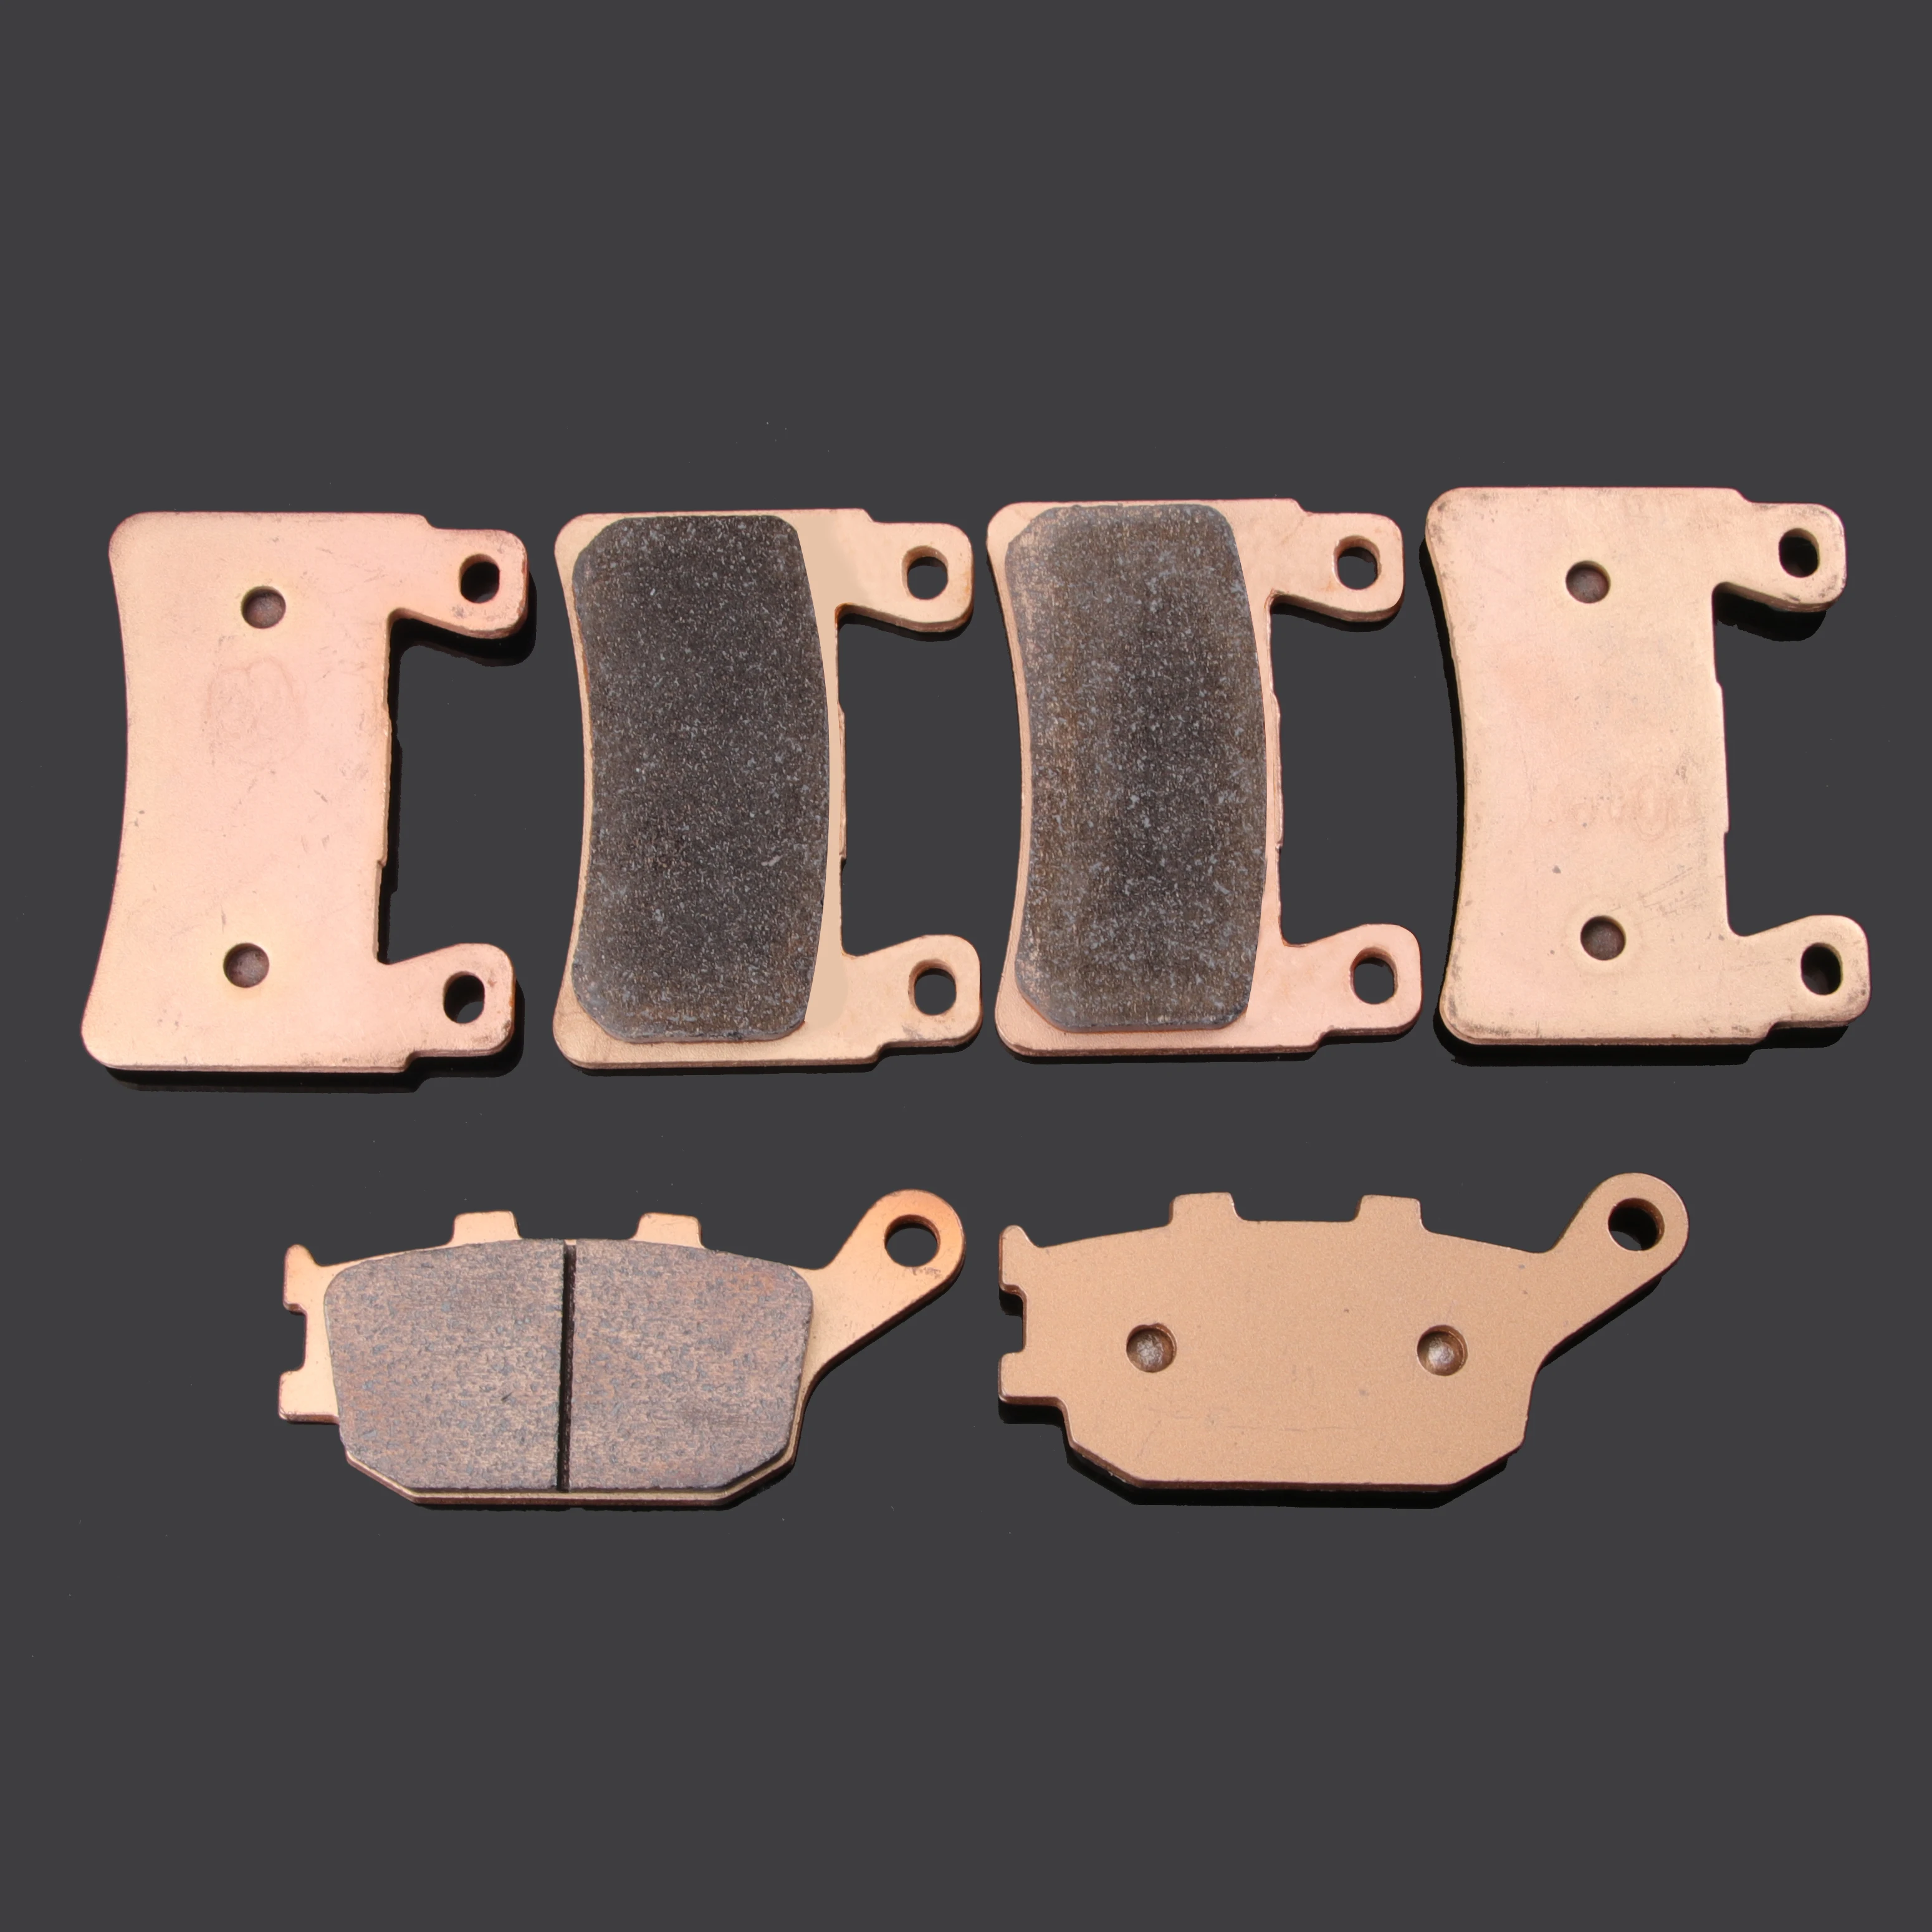 Motorcycle Medal Front Rear Brake Pads For Honda CBR 600 F4 F4i CBR929 CBR954 CBR900 RR VTR 1000 SP-1 (SP45) CB400 VTEC CB1100